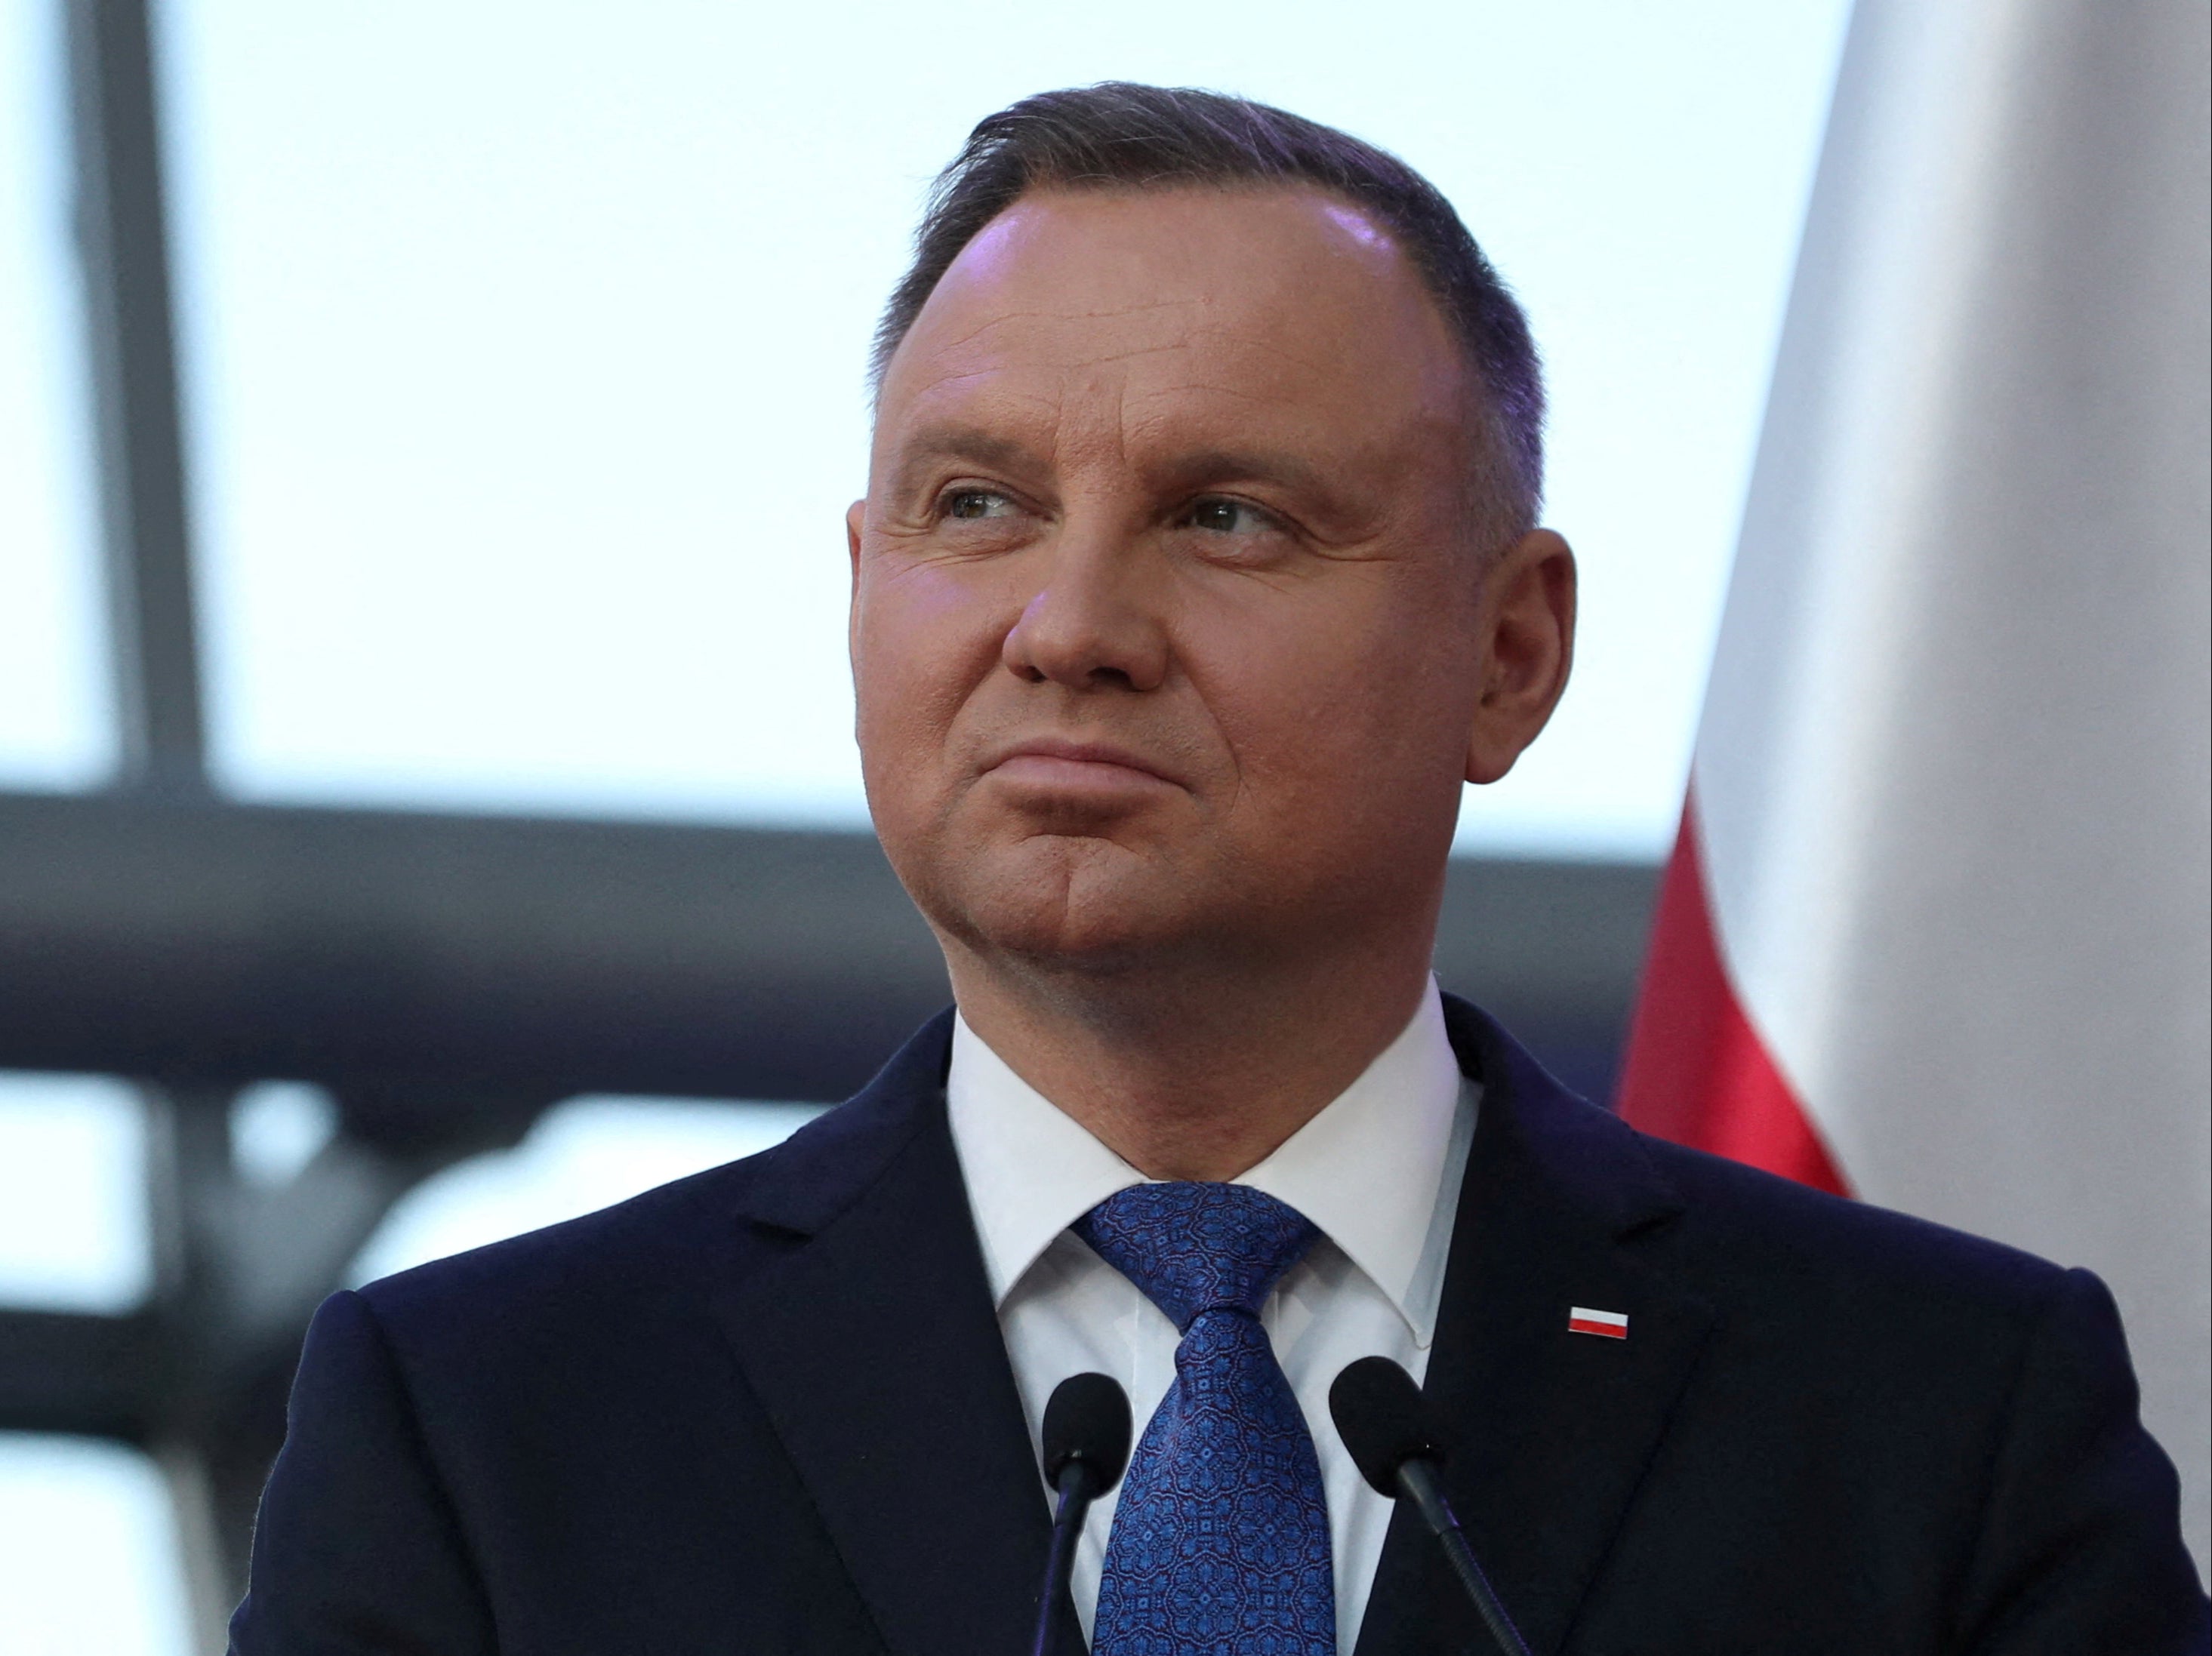 Poland’s president has claimed talks with Russian leader Vladimir Putin are like negotiating with Adolf Hitler